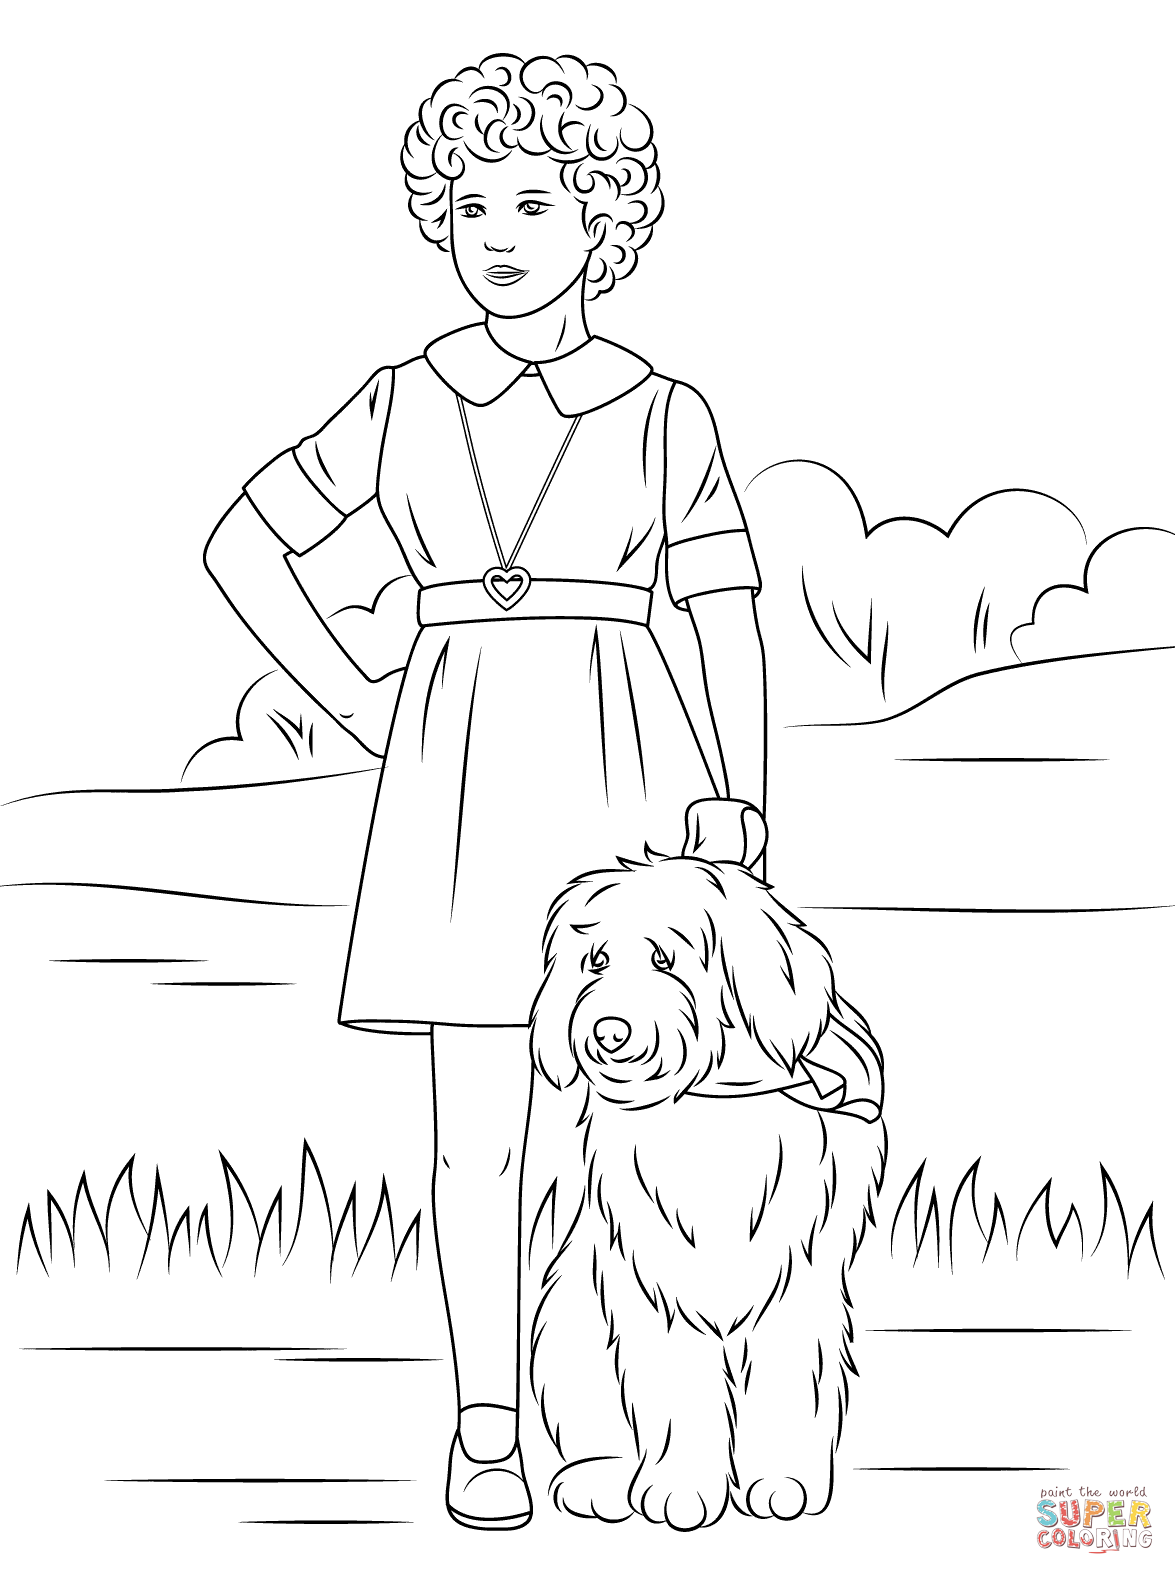 Orphan Annie with One-Lung Coloring page | Free Printable Coloring ...